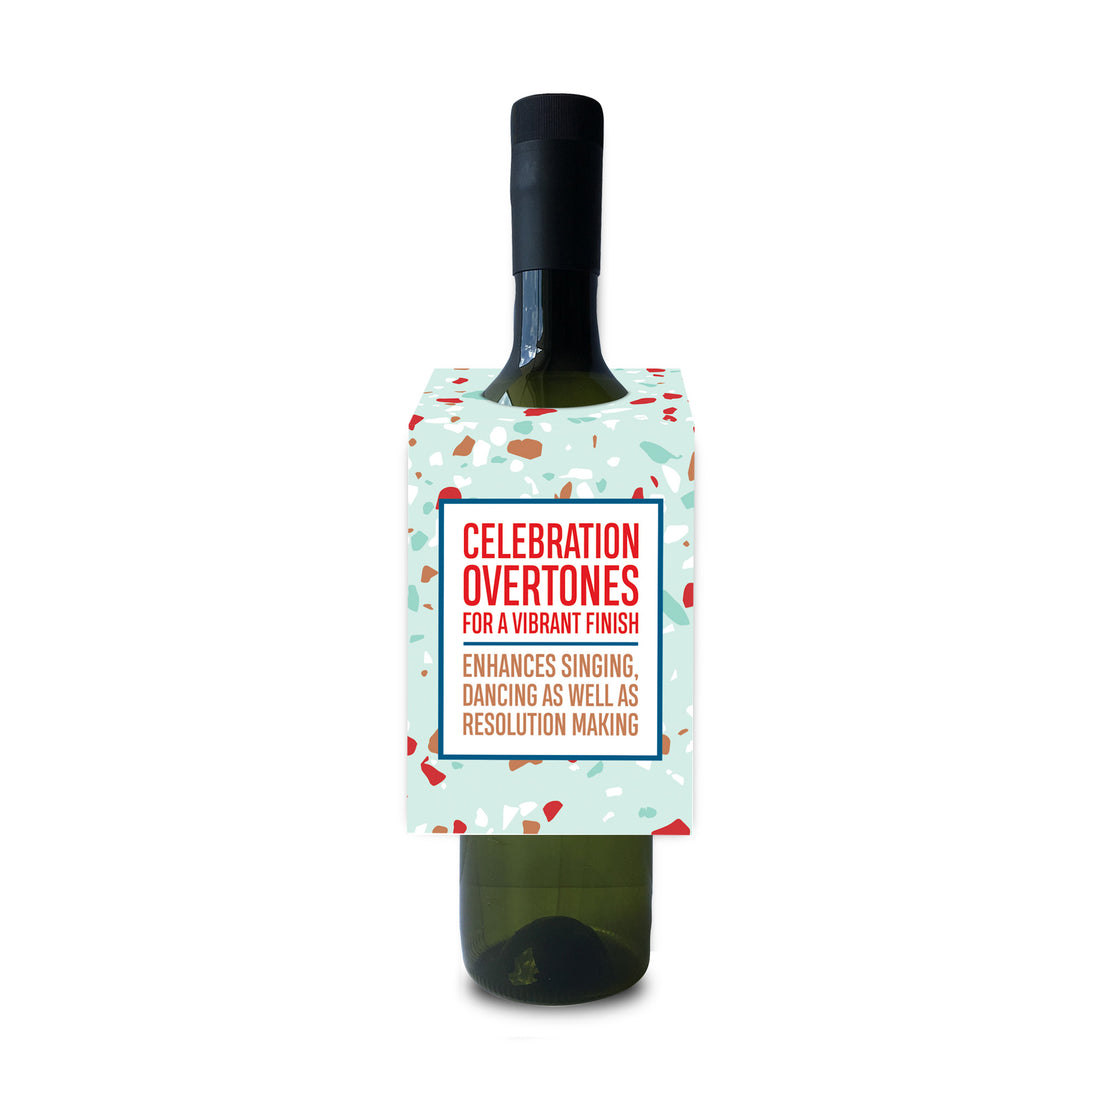 Celebration overtones for a vibrant finish, enhances singing, dancing as well as resolution making new years wine and spirit tag by I&